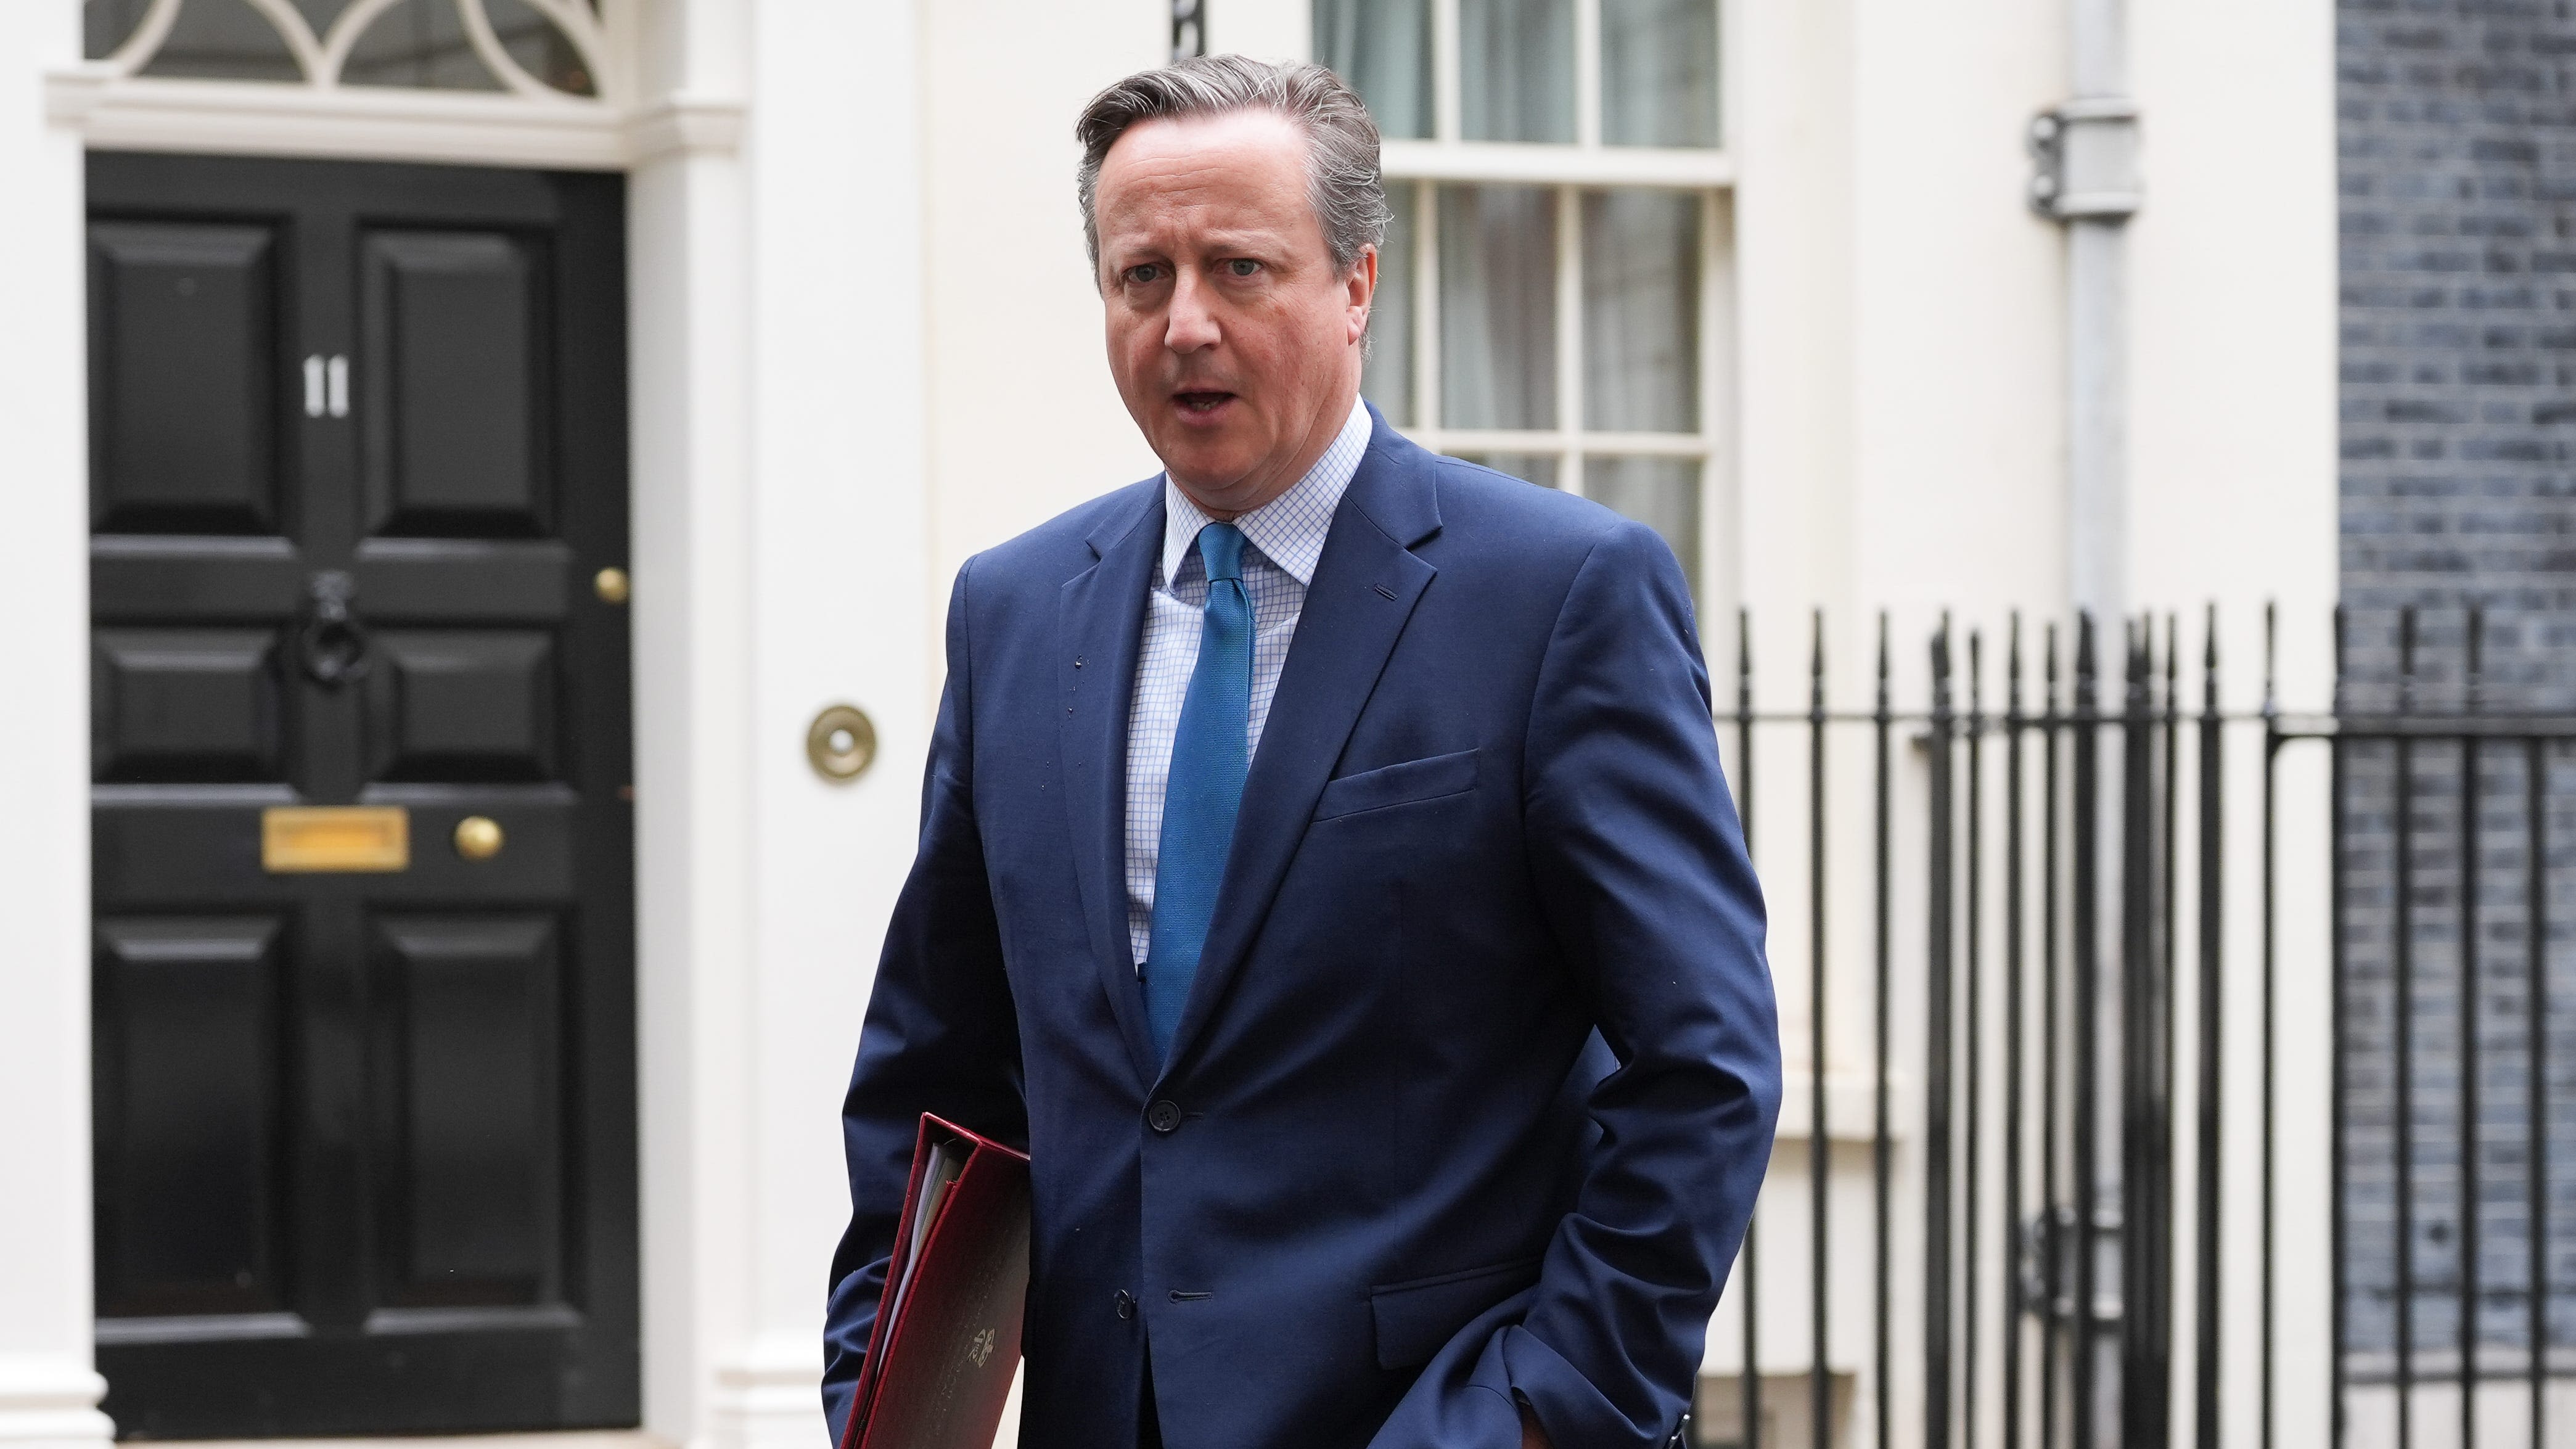 Cameron travels to Albania to bolster partnership on tackling illegal migration